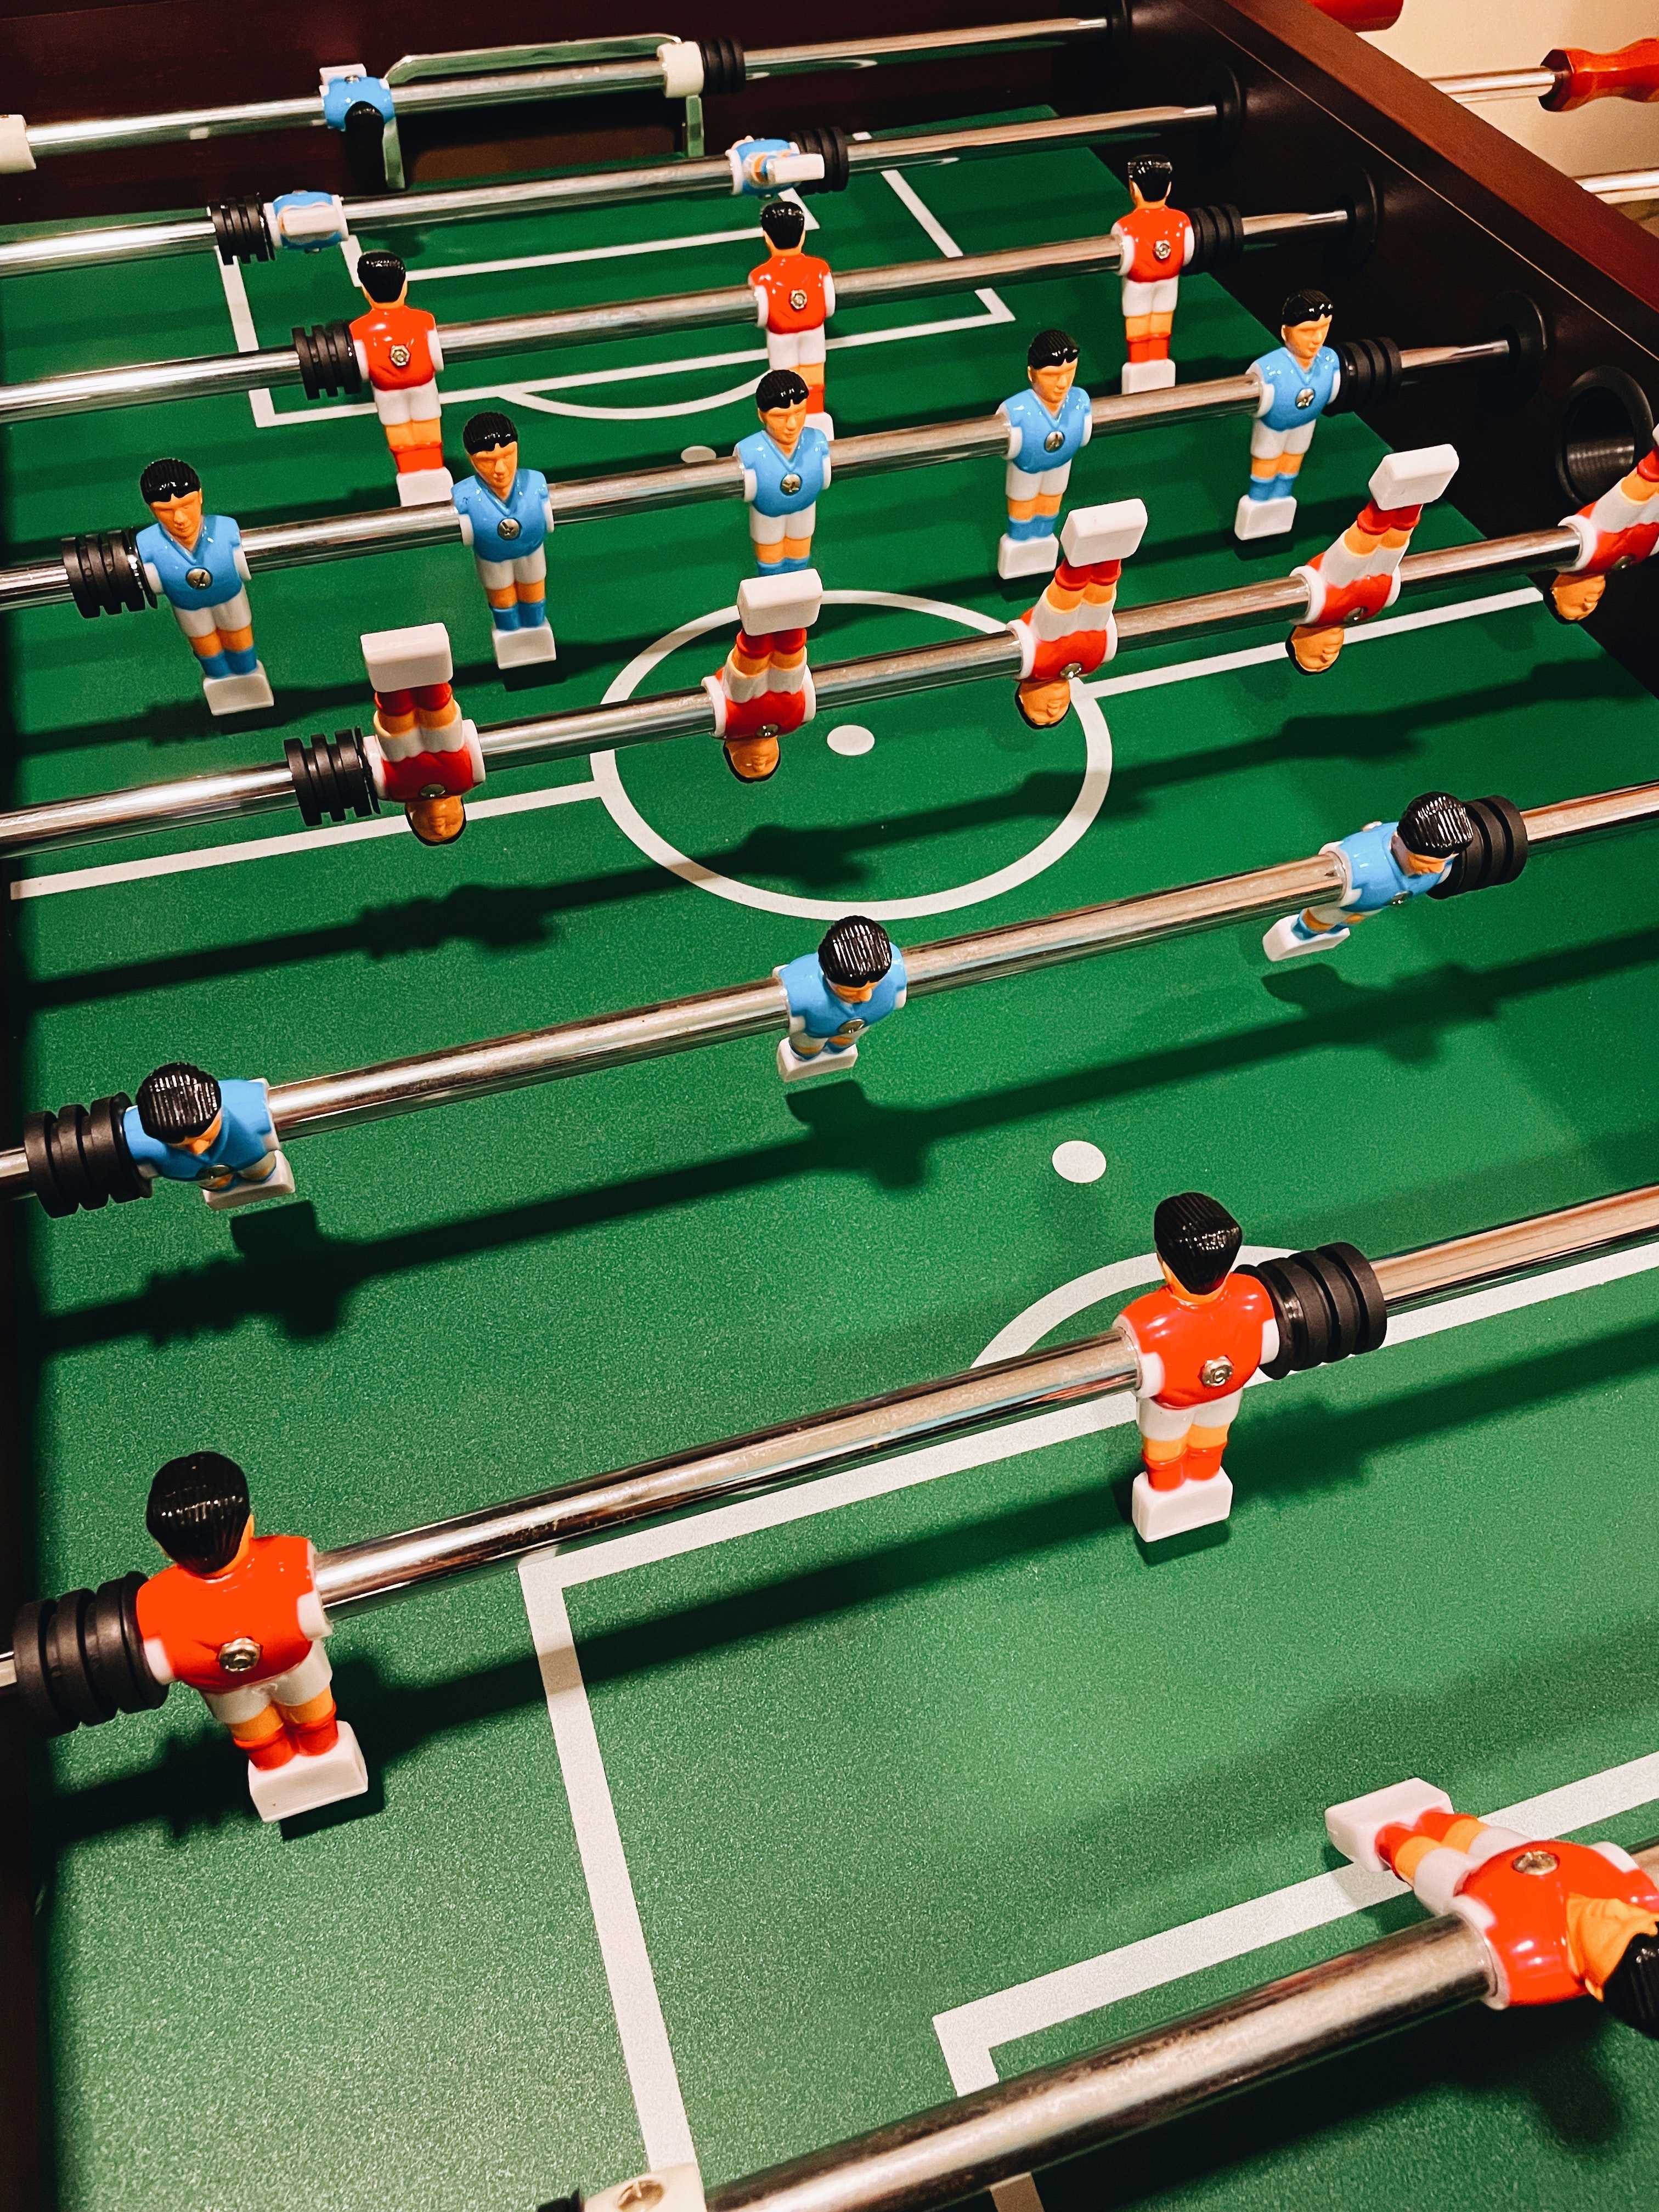 Image of a foosball table